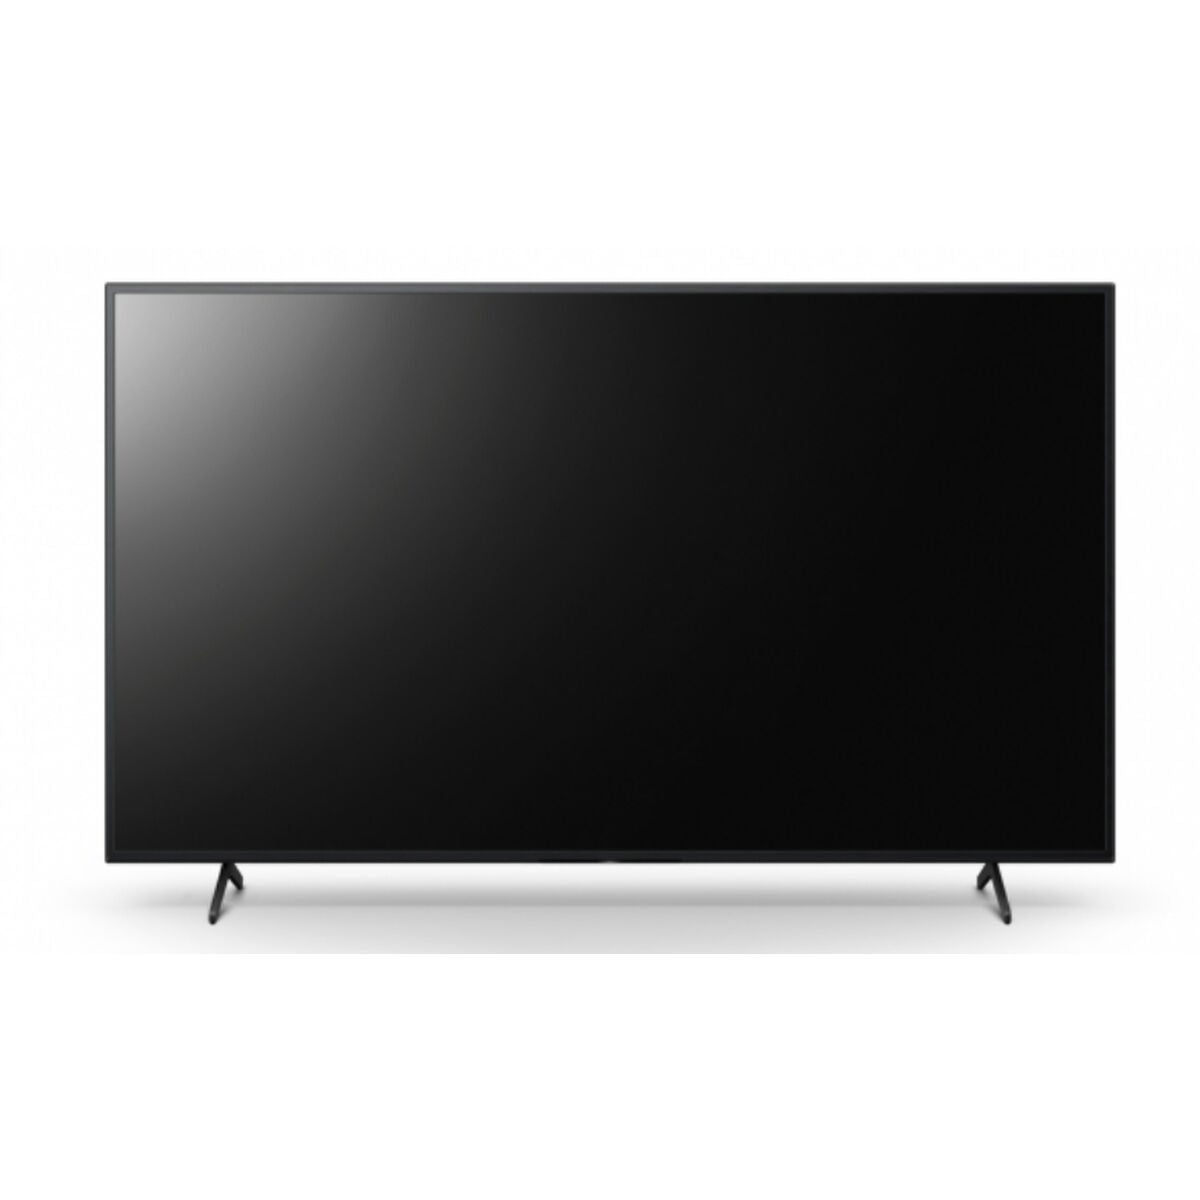 Monitor Videowall Sony 55" IPS D-LED LCD 60 Hz, Sony, Computing, monitor-videowall-sony-55-ips-d-led-lcd-60-hz, :55 INCHES or 139.7 CM, :Direct LED, :Ultra HD, Brand_Sony, category-reference-2609, category-reference-2625, category-reference-2931, category-reference-t-19685, cinema and television, Condition_NEW, entertainment, Price_900 - 1000, RiotNook